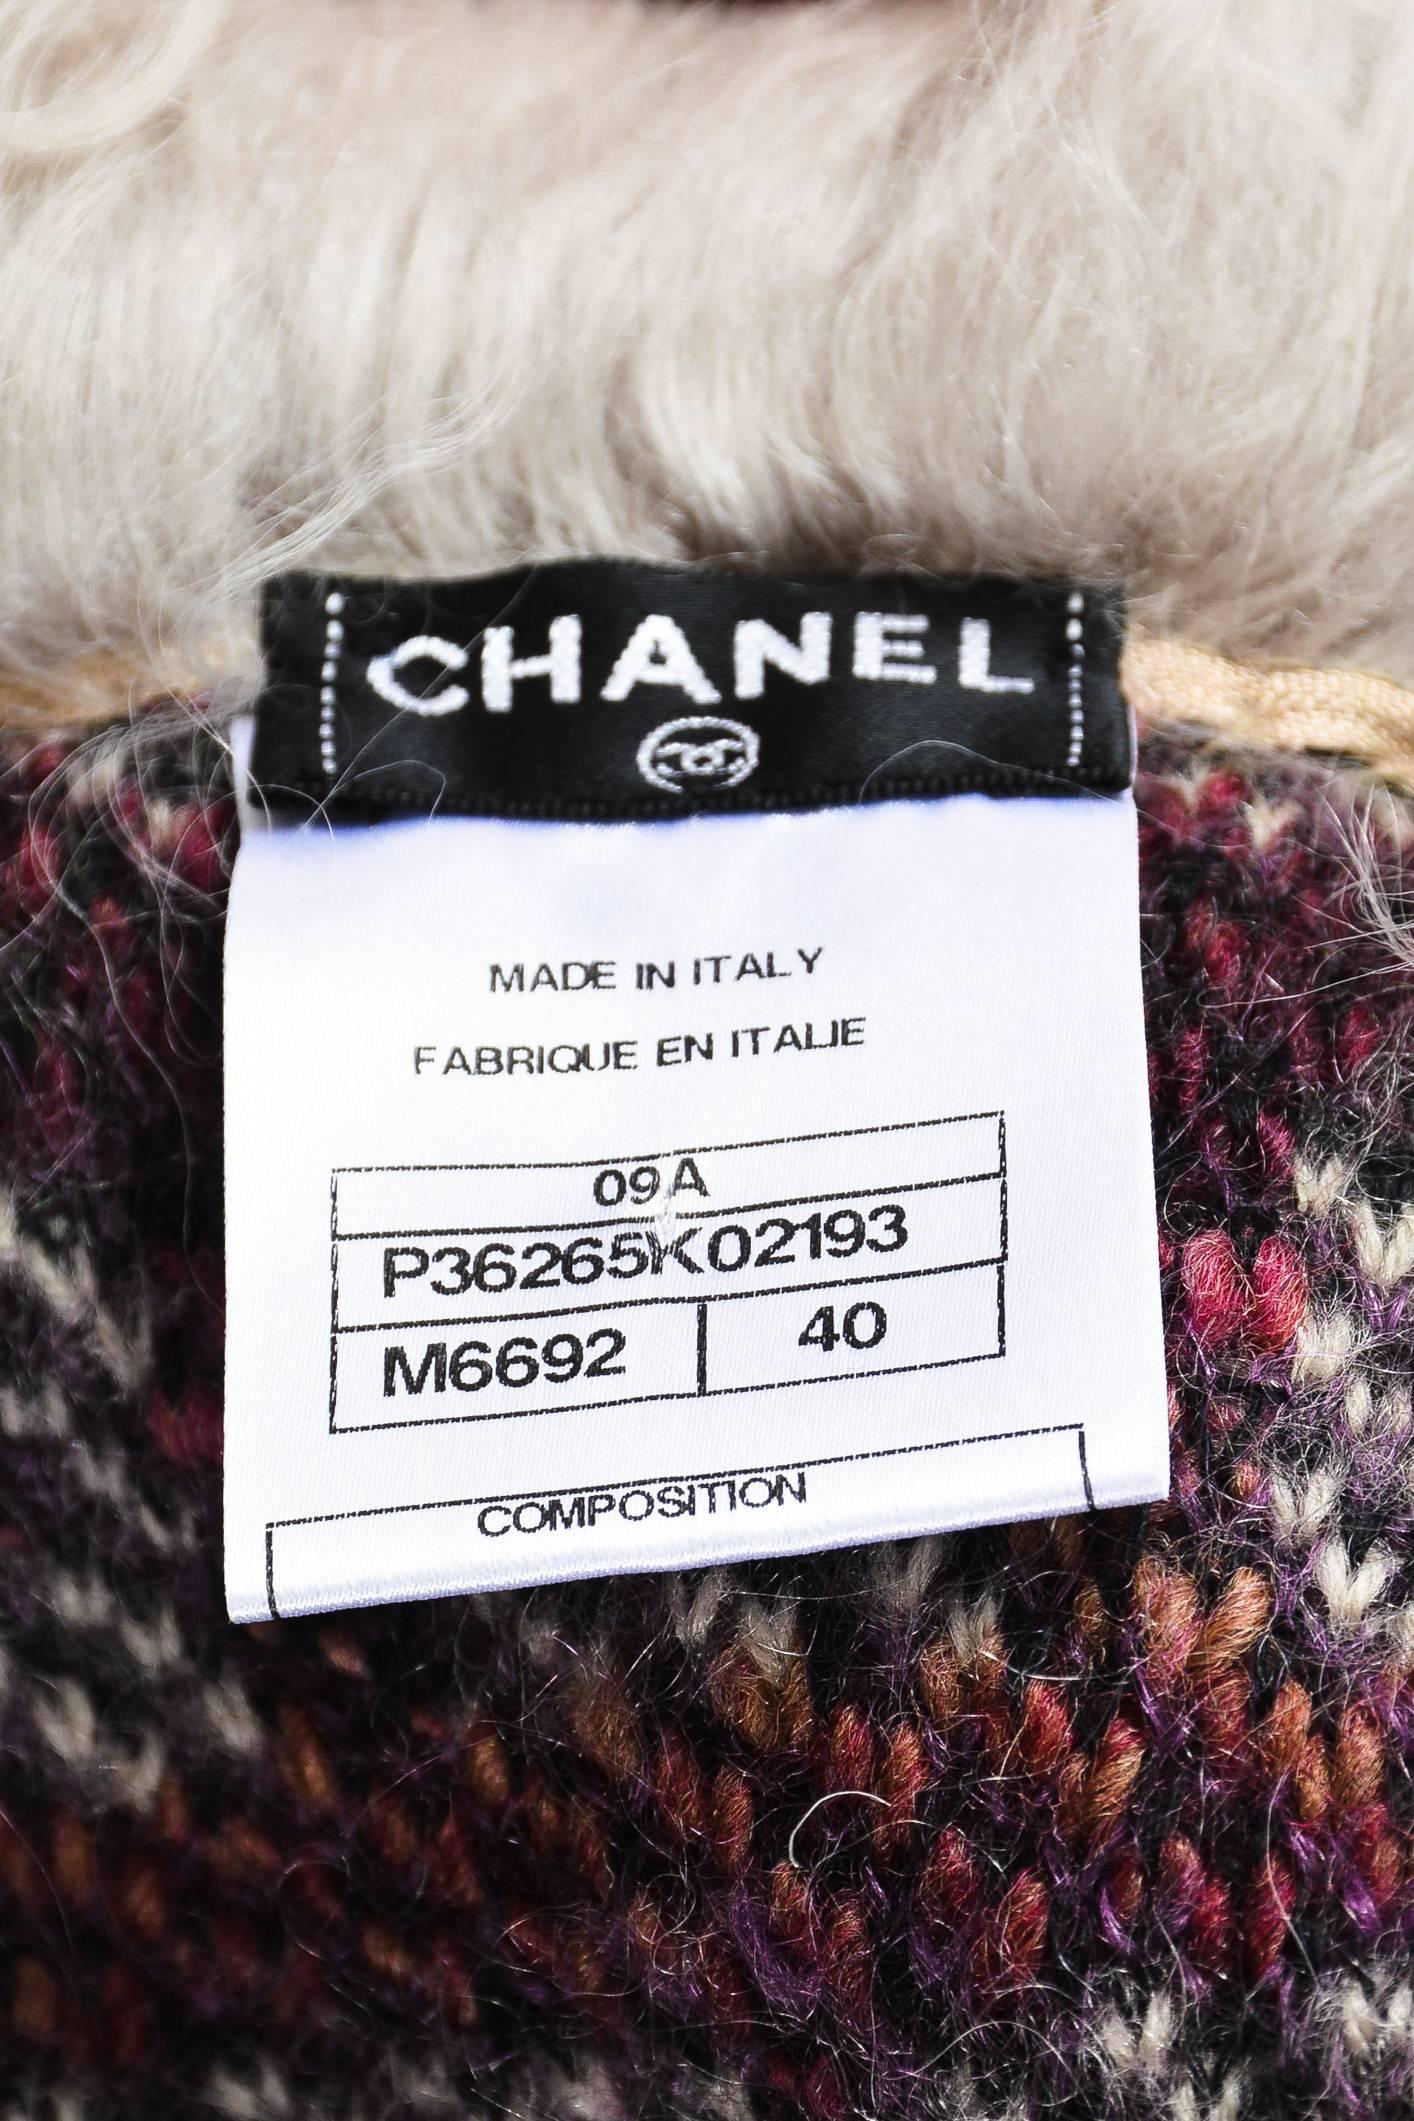 Chanel 09A Multicolor Wool Mohair Cashmere Lamb Trim Long Sweater Coat Size 40 In Excellent Condition For Sale In Chicago, IL